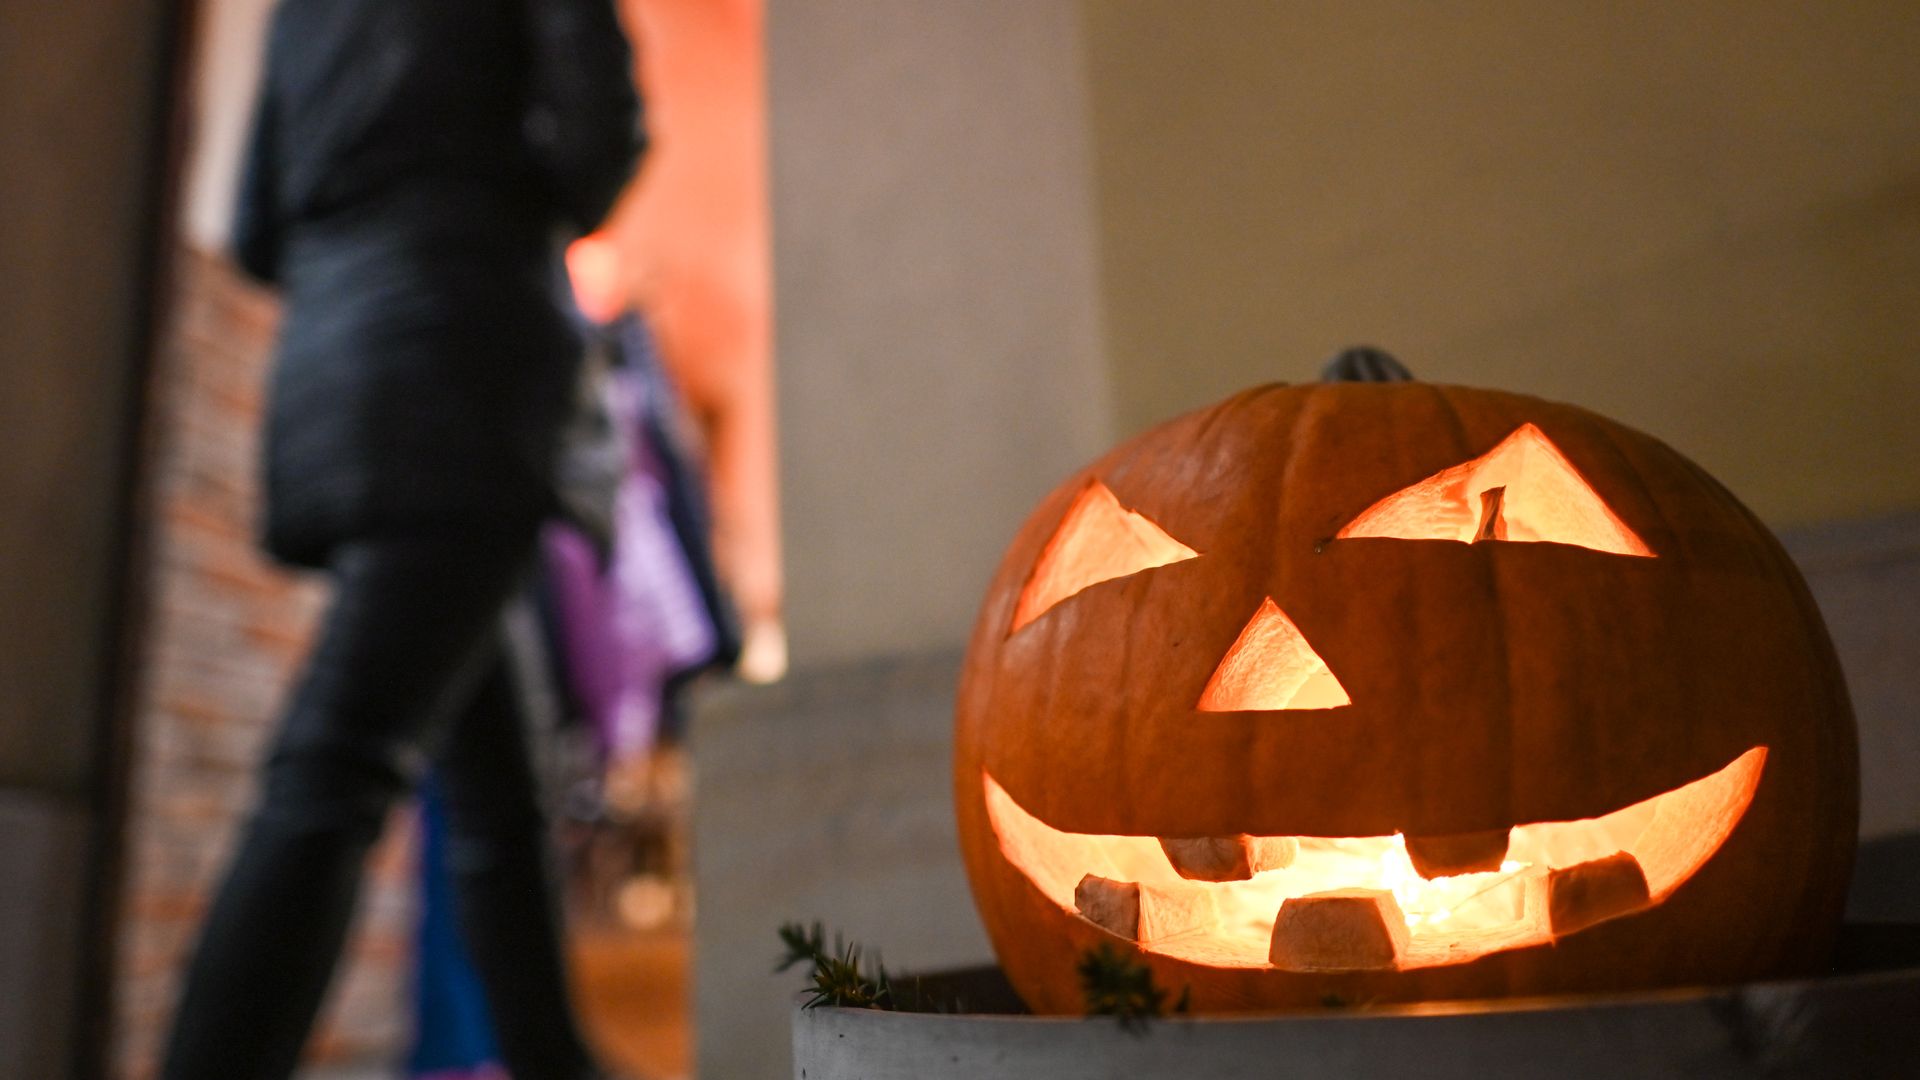 Light emits from a jack-o'-lantern sitting on a porch during Halloween 